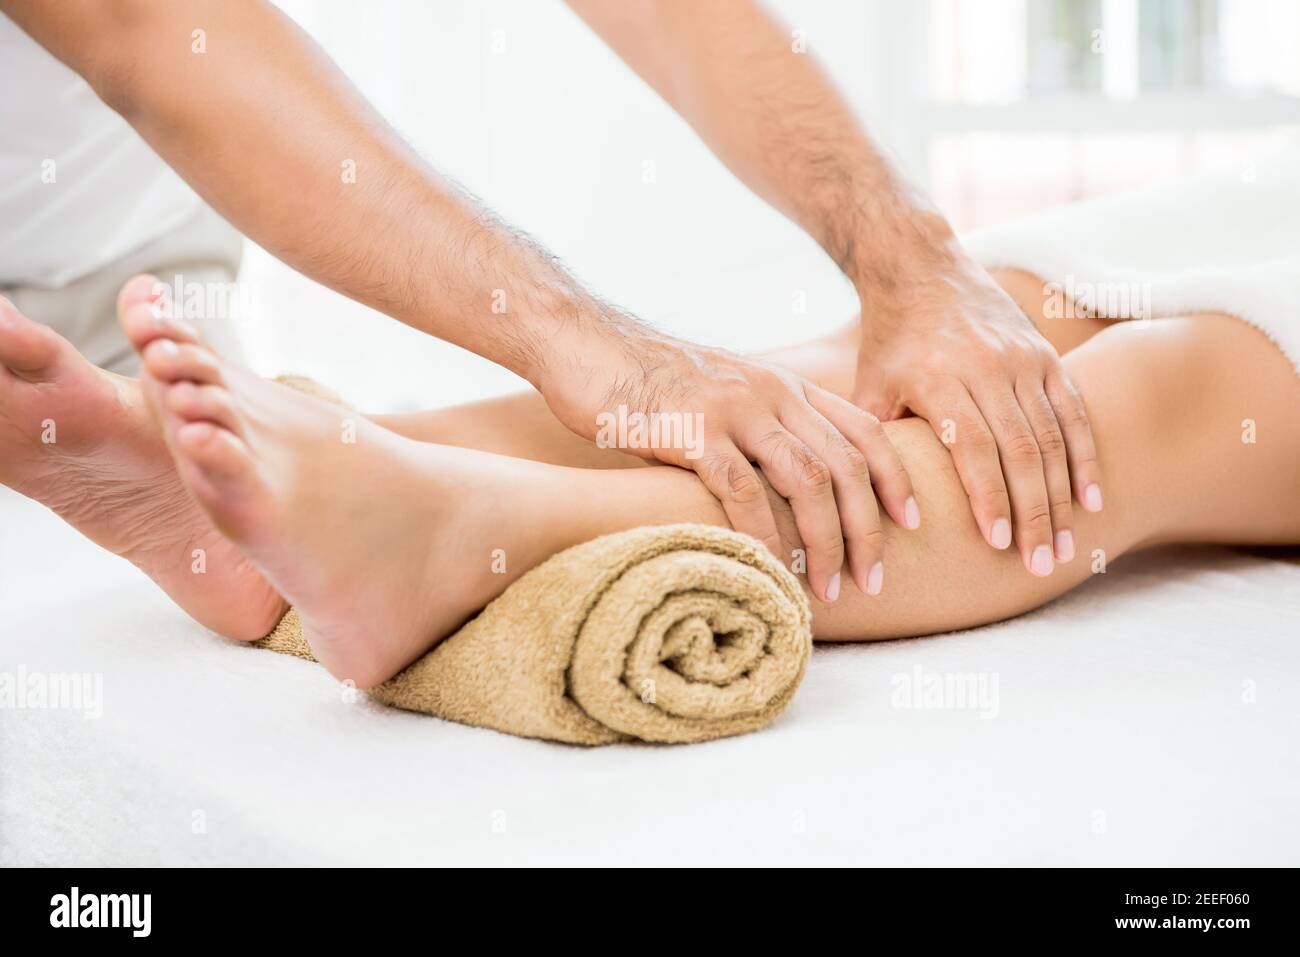 Hands of male therapist (masseur) giving massage to a woman leg Stock Photo